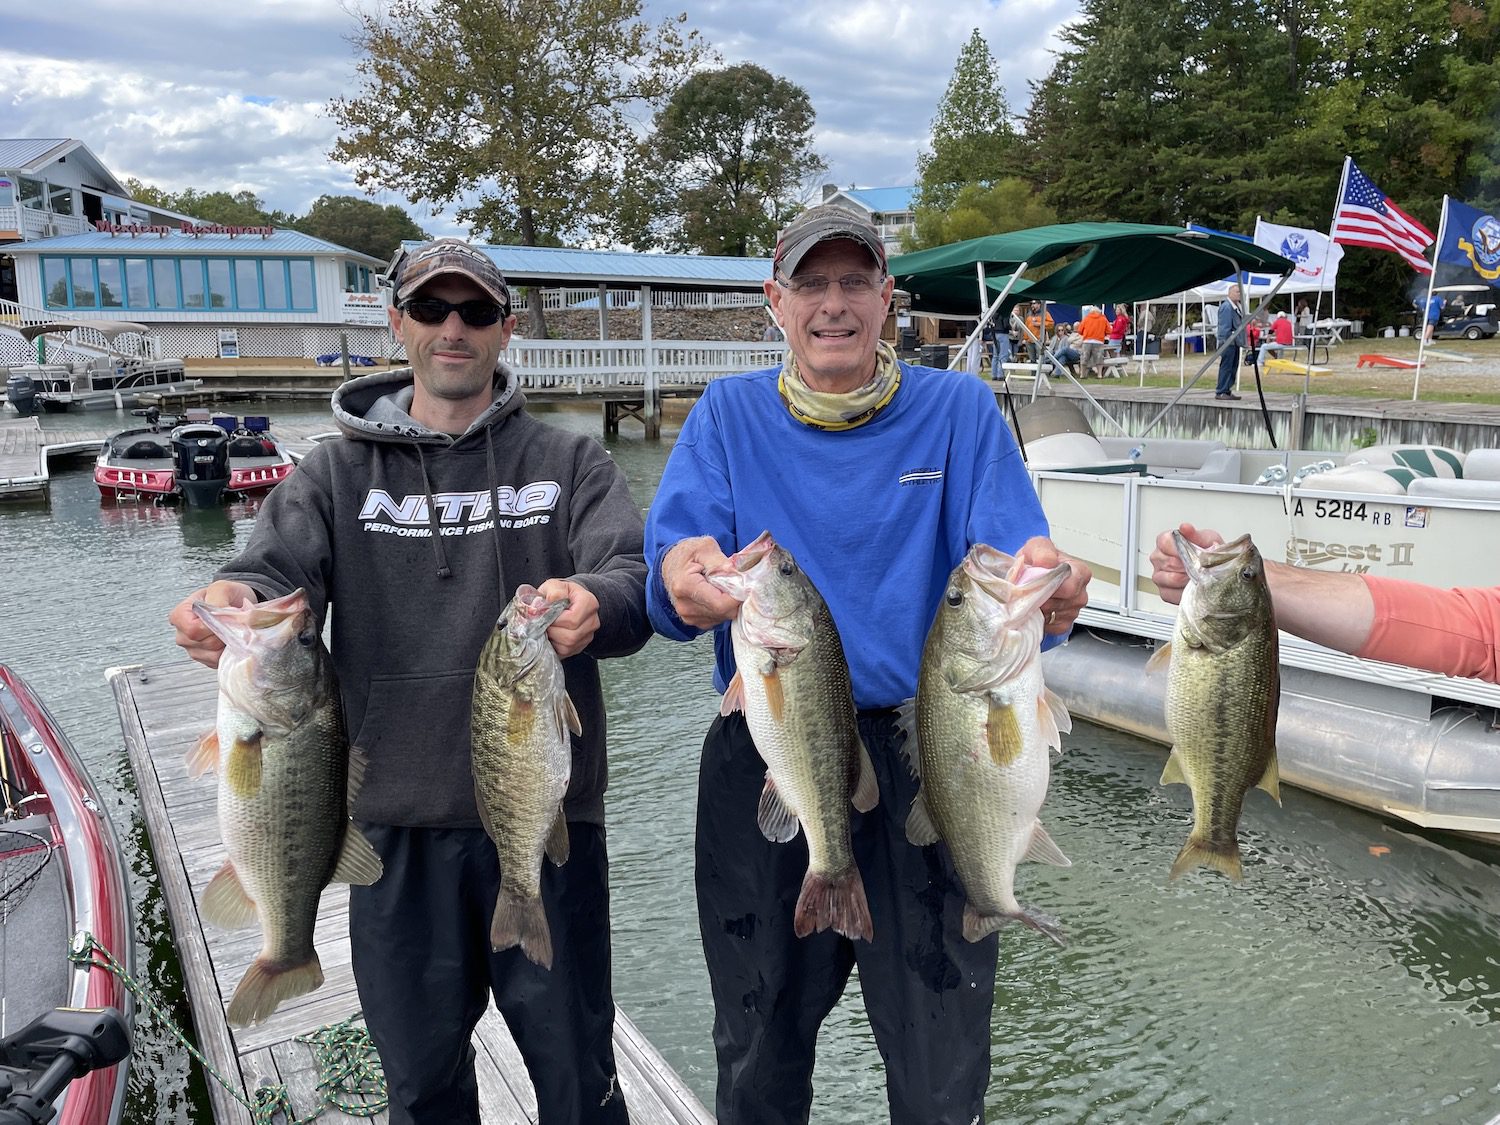 Jeff & Clay Ross Win the Bass Cast Tourney Series on SML Oct 16th 2021 with 19.24lbs